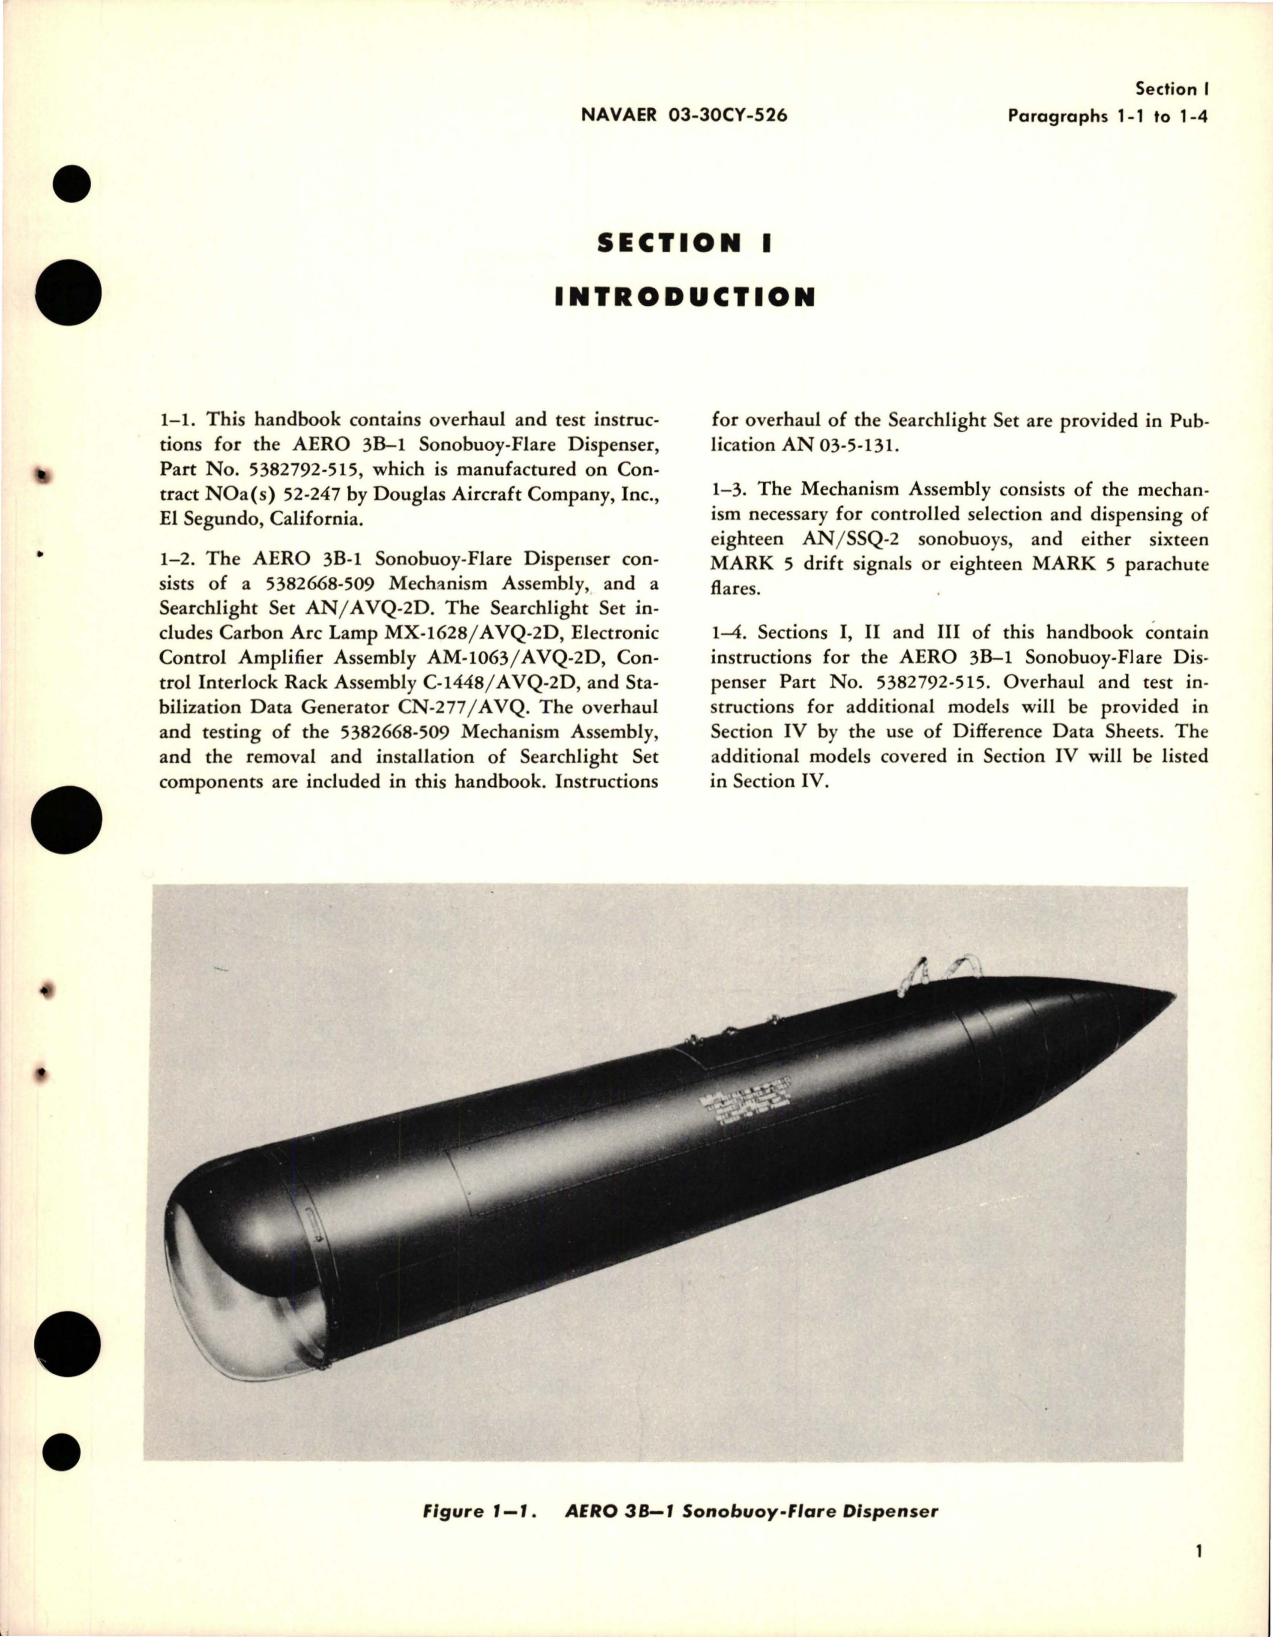 Sample page 5 from AirCorps Library document: Overhaul Instructions for AERO 3B-1 Sonobuoy-Flare Dispenser - Part 5382792-515